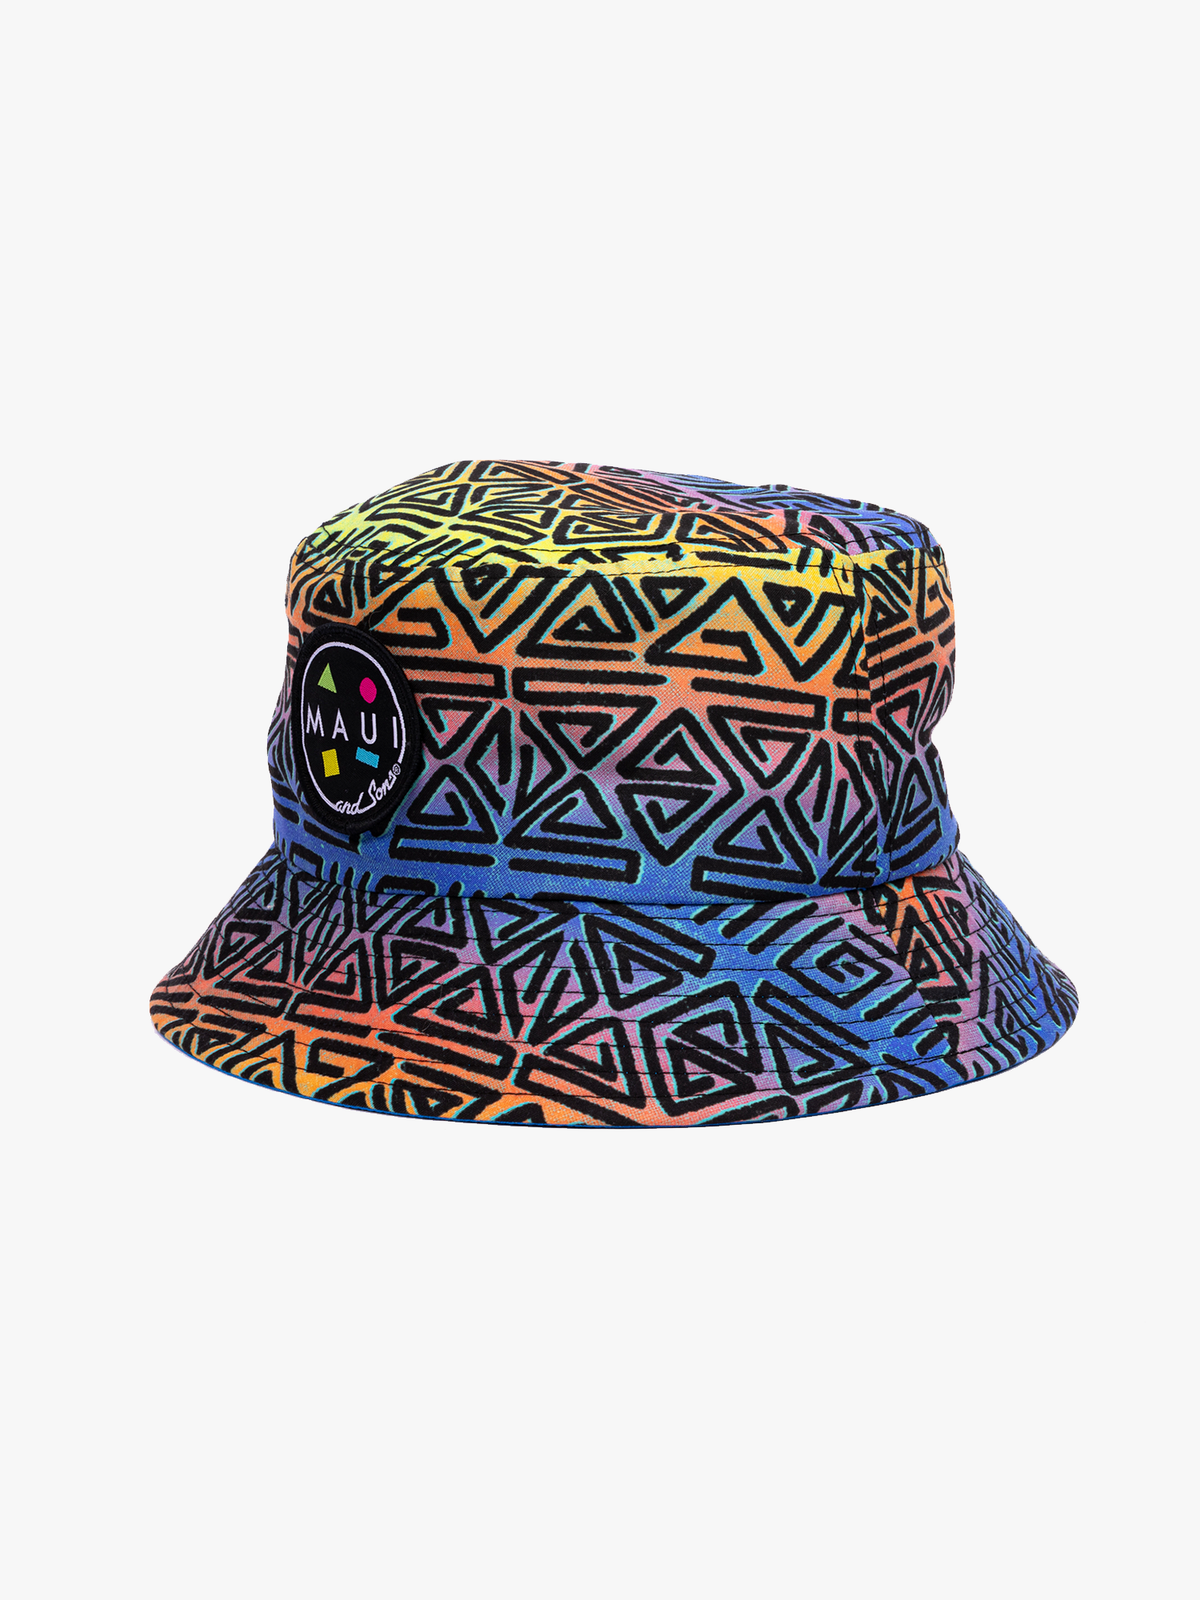 Feel Good Bucket Hat | Maui and Sons